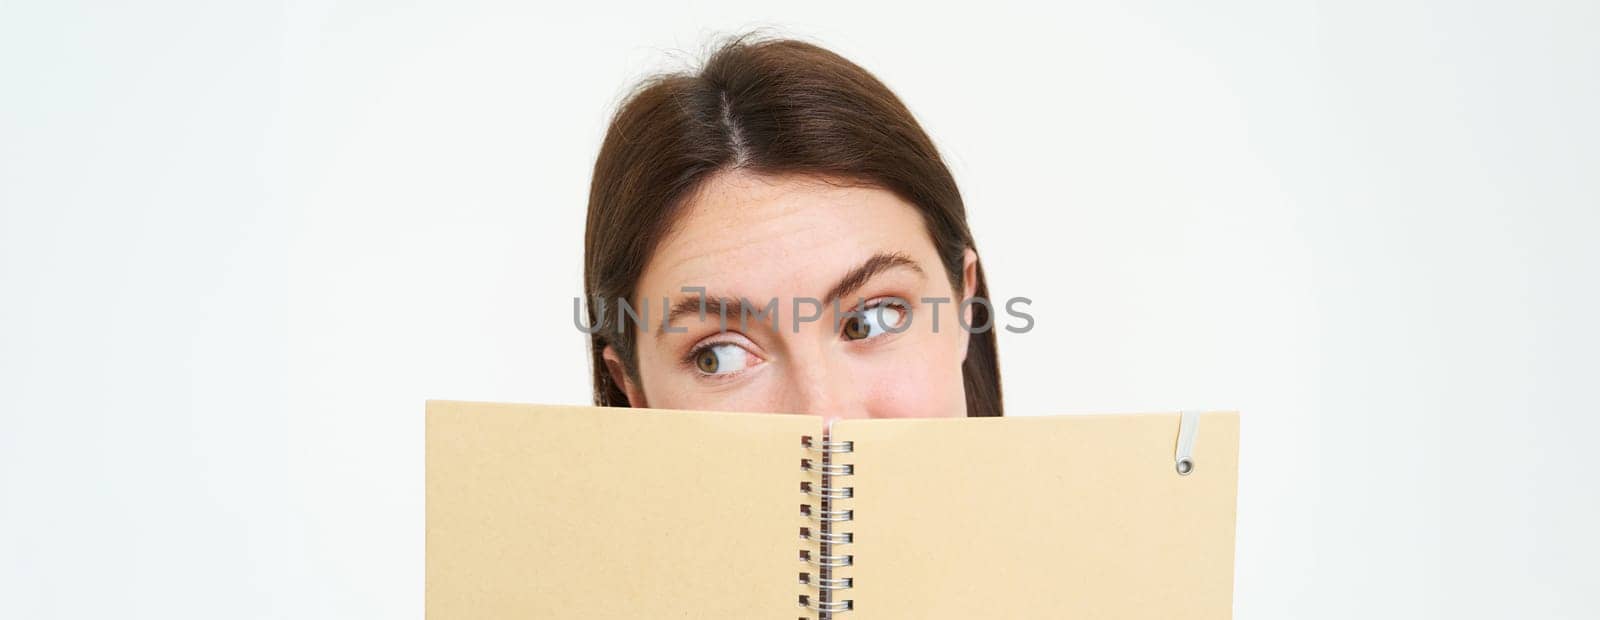 Image of woman reading something interesting in notebook, holding planner and making a side eye, standing over white background.